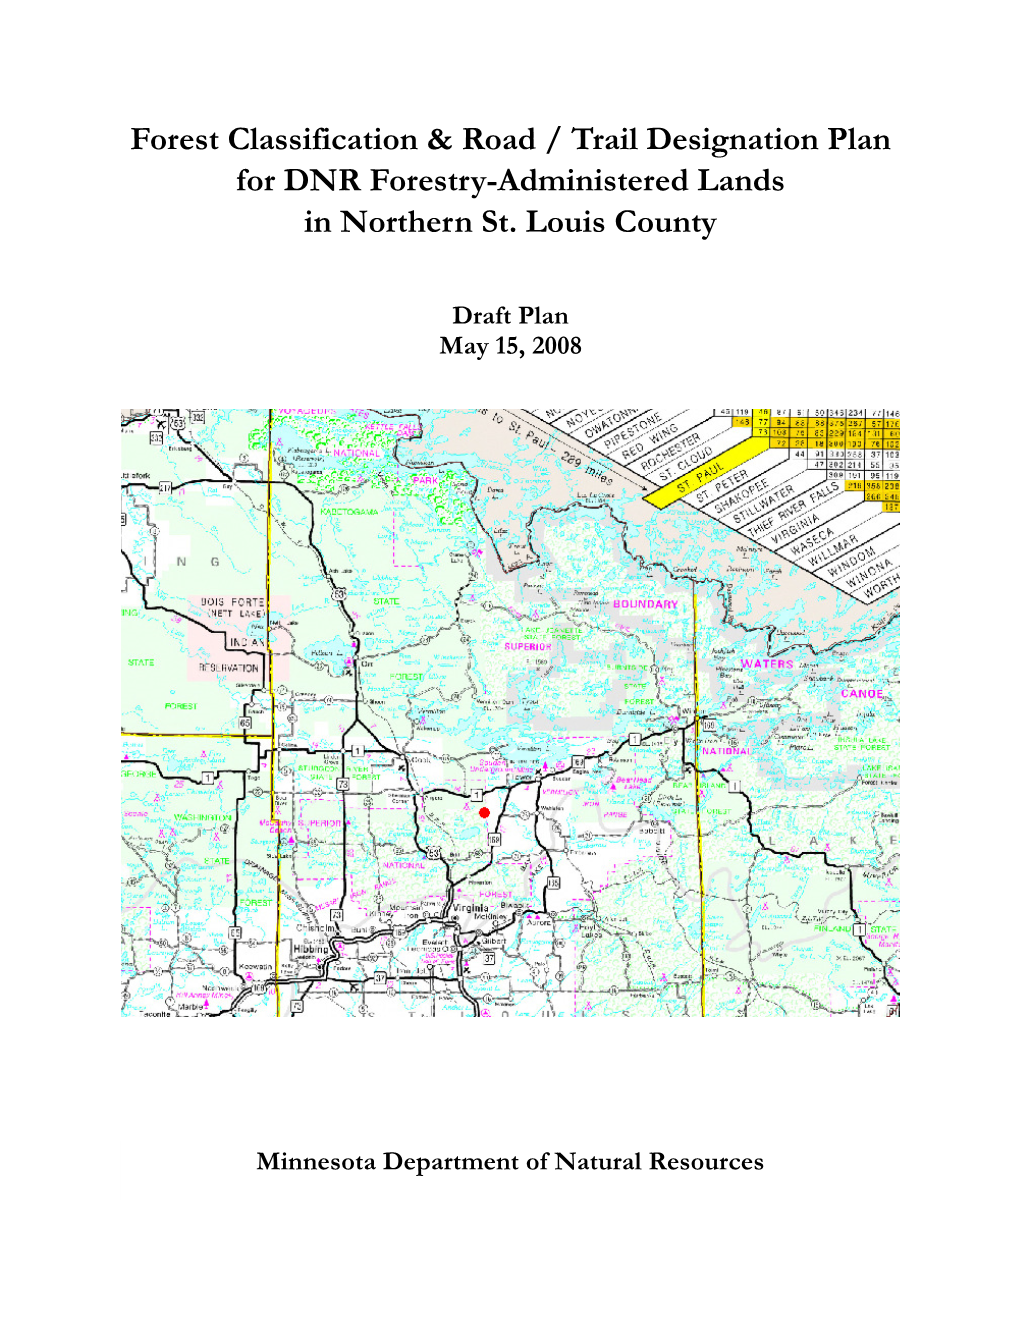 Forest Classification & Road / Trail Designation Plan for DNR Forestry